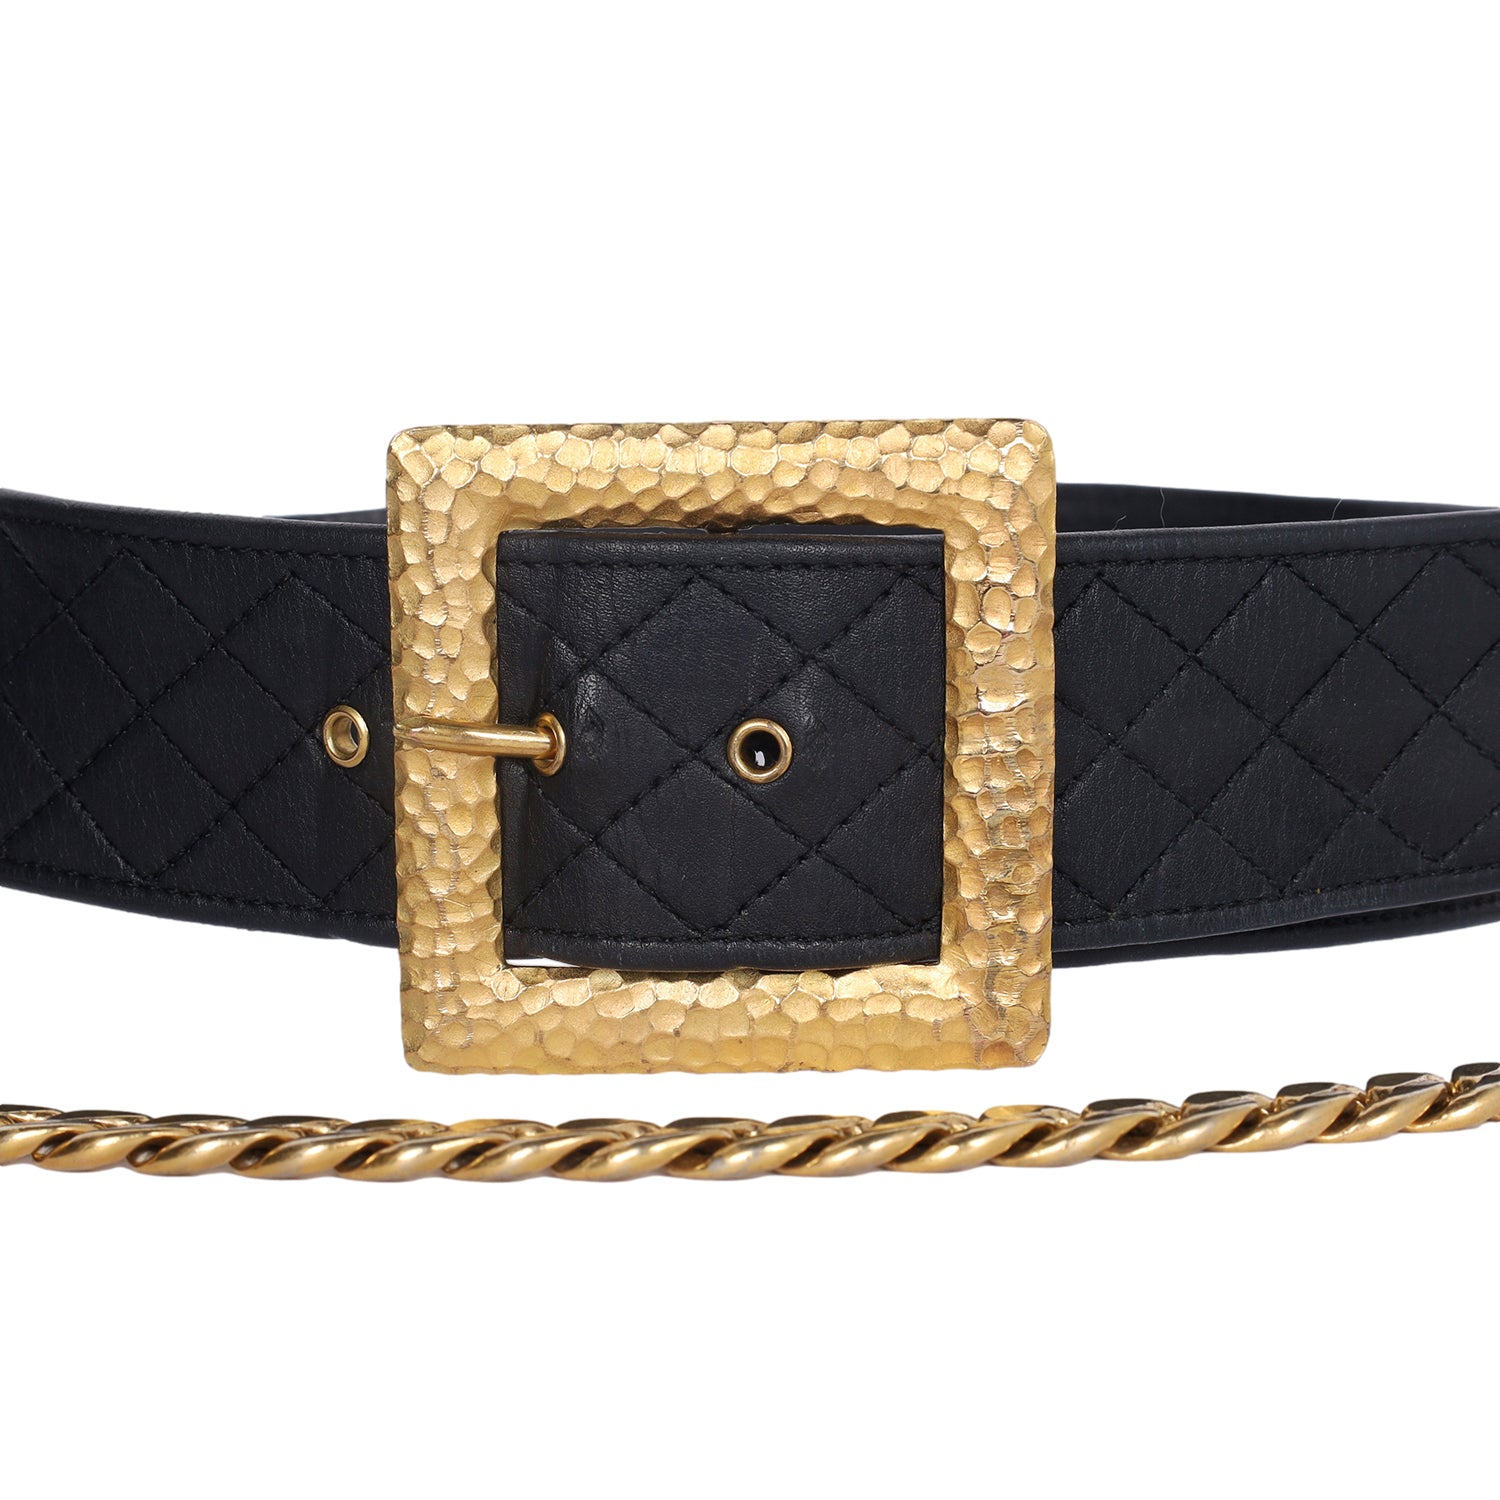 Chanel Vintage Coco Chanel Leather Link Waist Belt Chanel